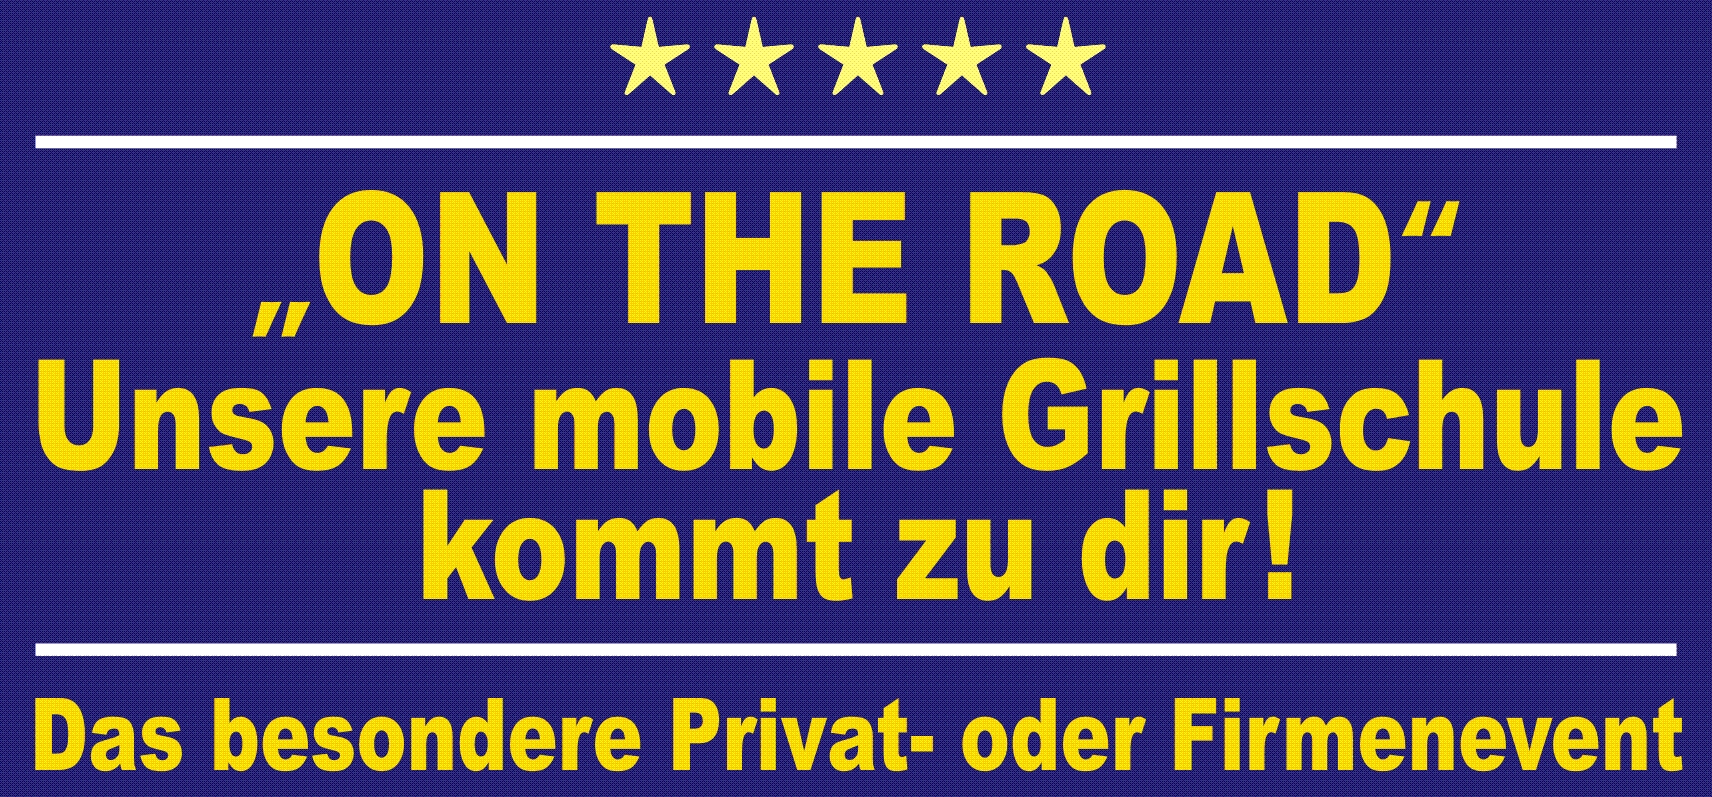 Grillkurs ON THE ROAD | MOBILE GRILLSCHULE